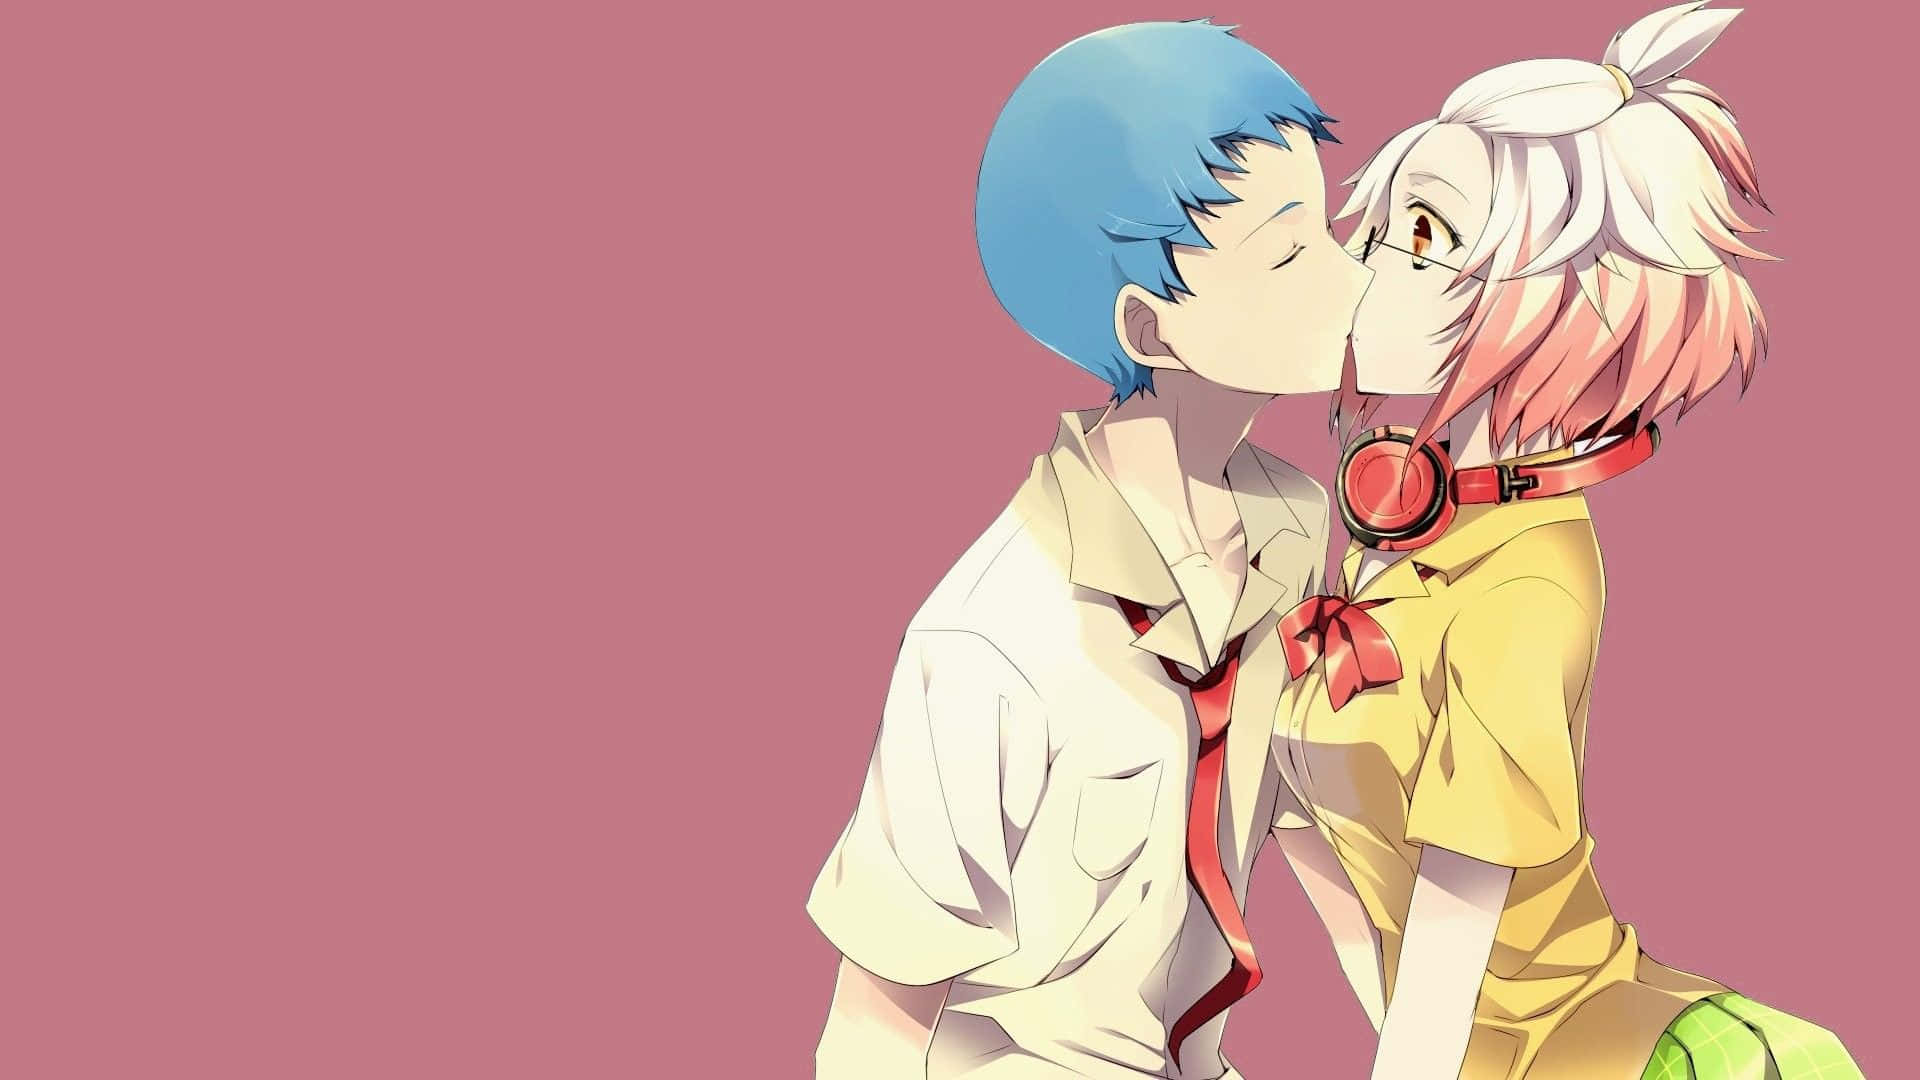 Sweet Embrace - A Delightful Anime Couple Moment